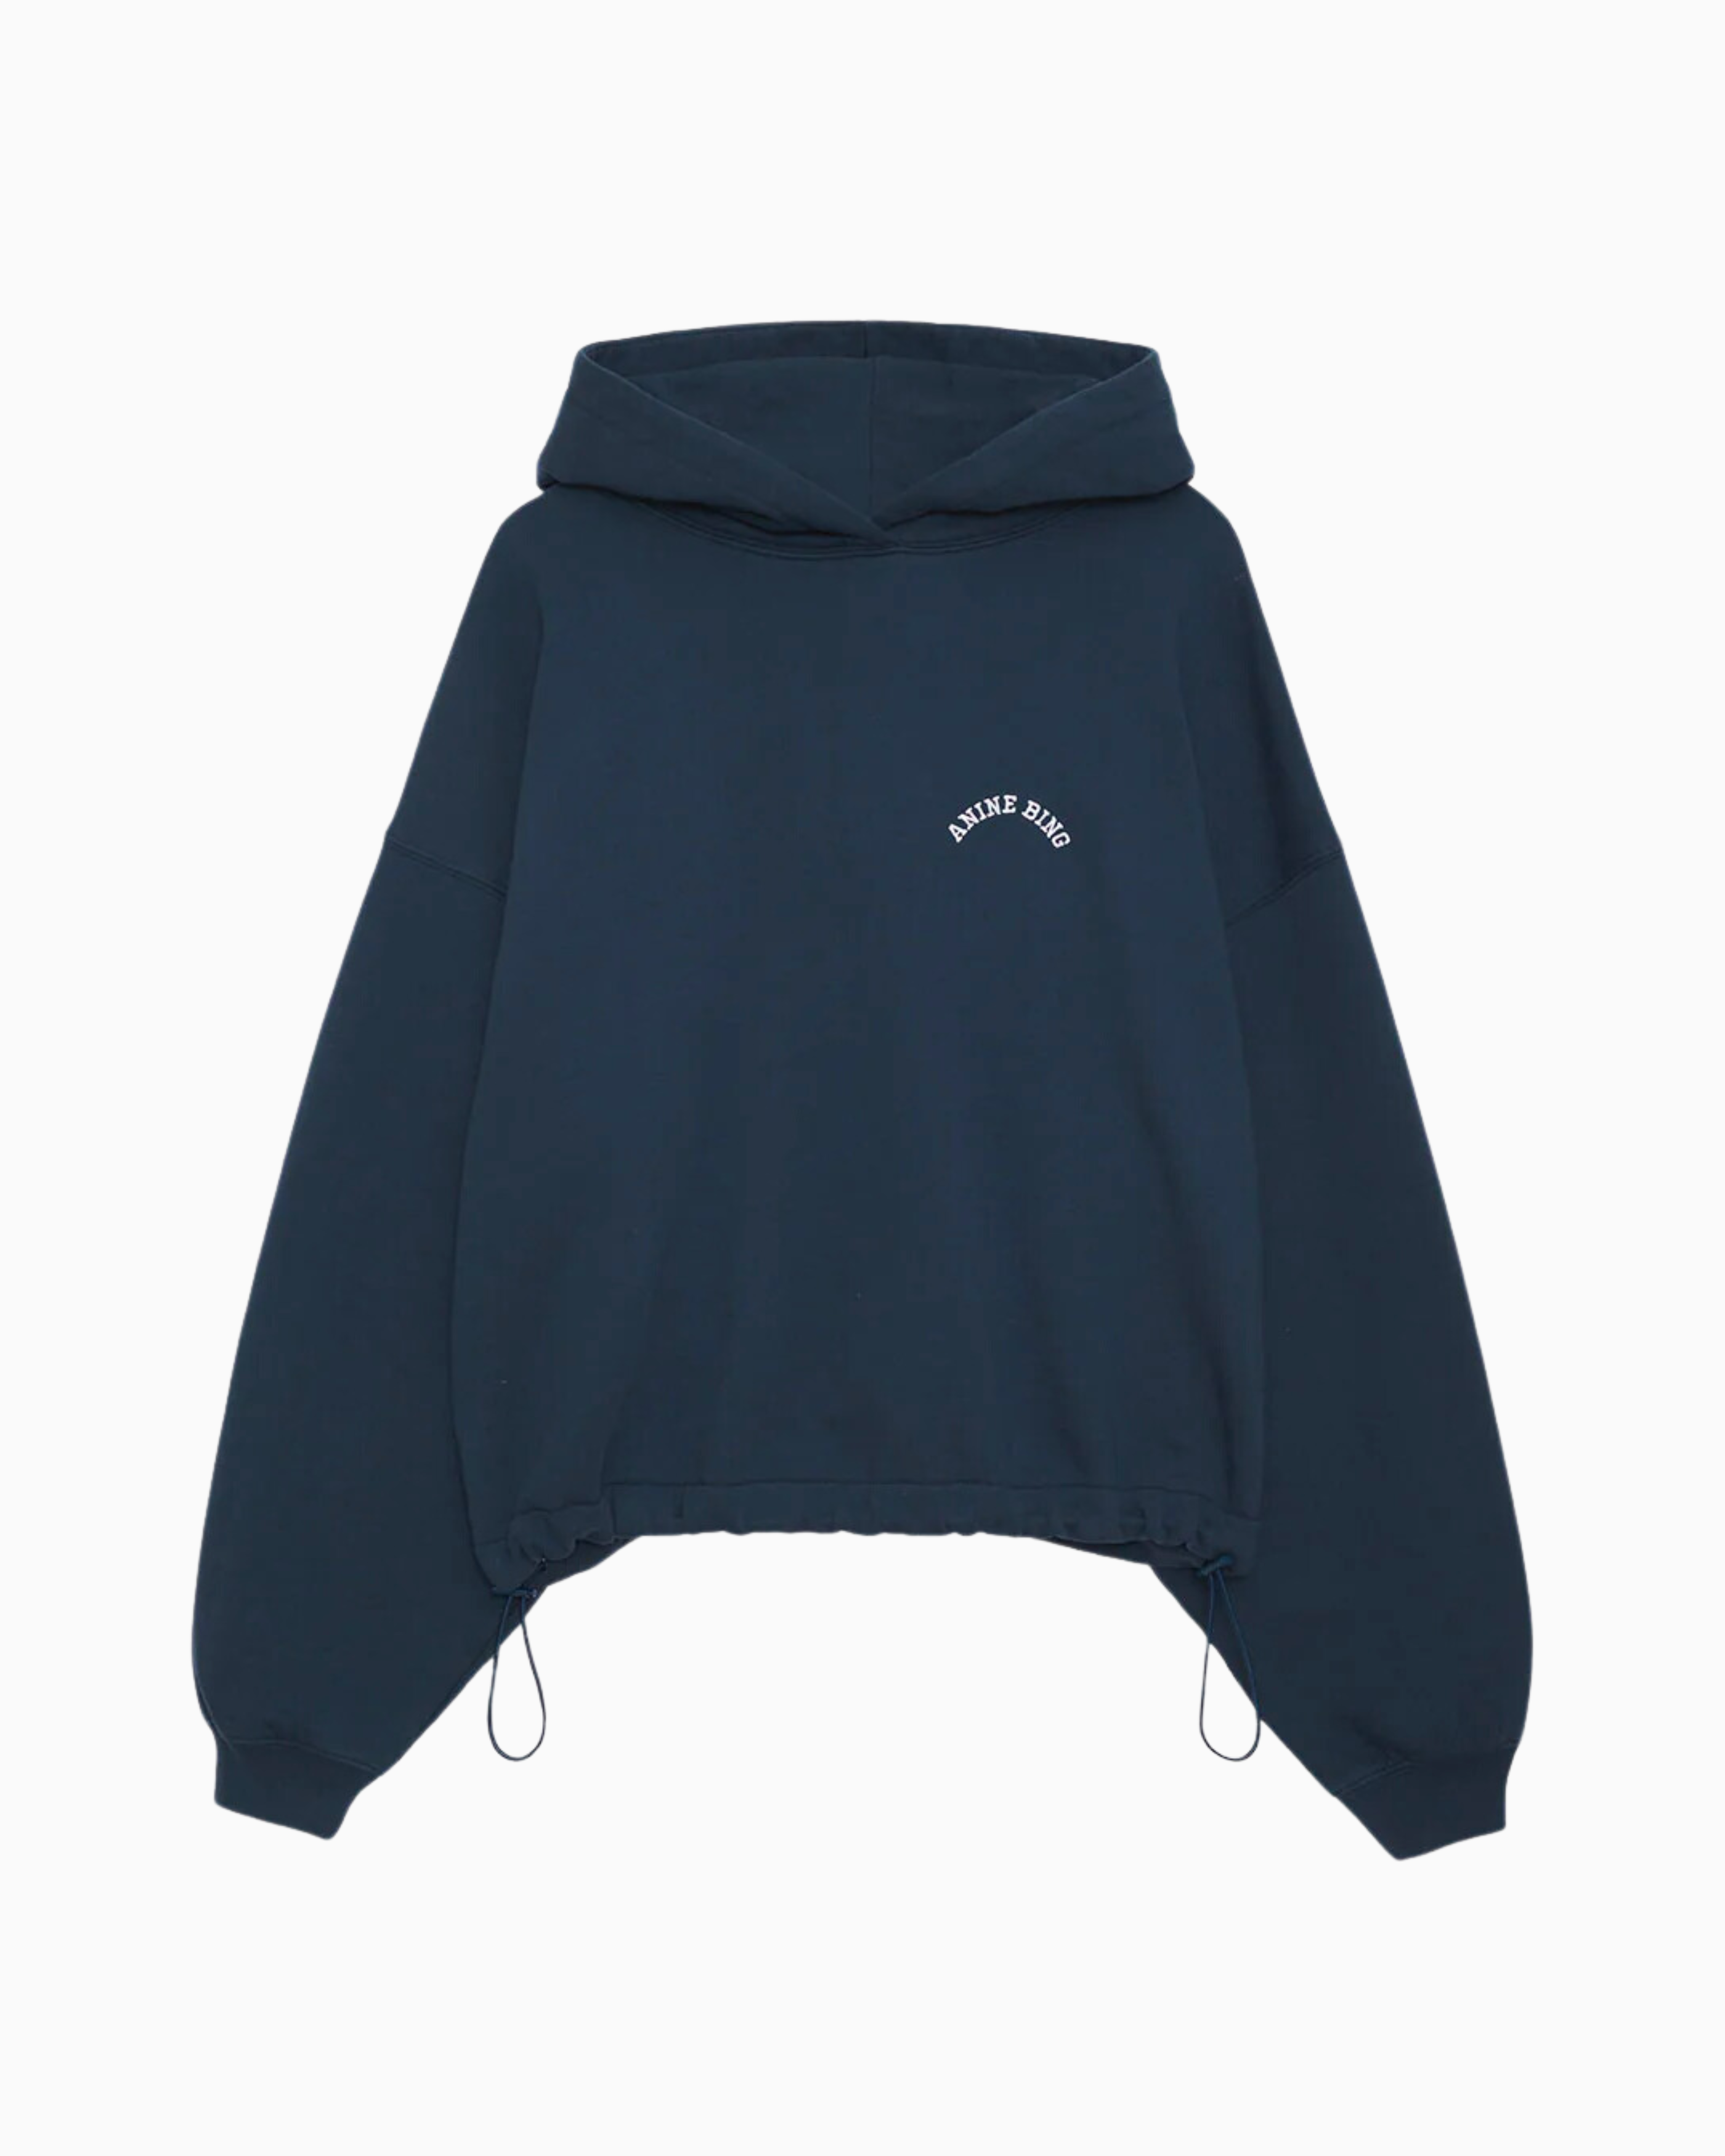 Anine Bing Lucy Hoodie in Navy